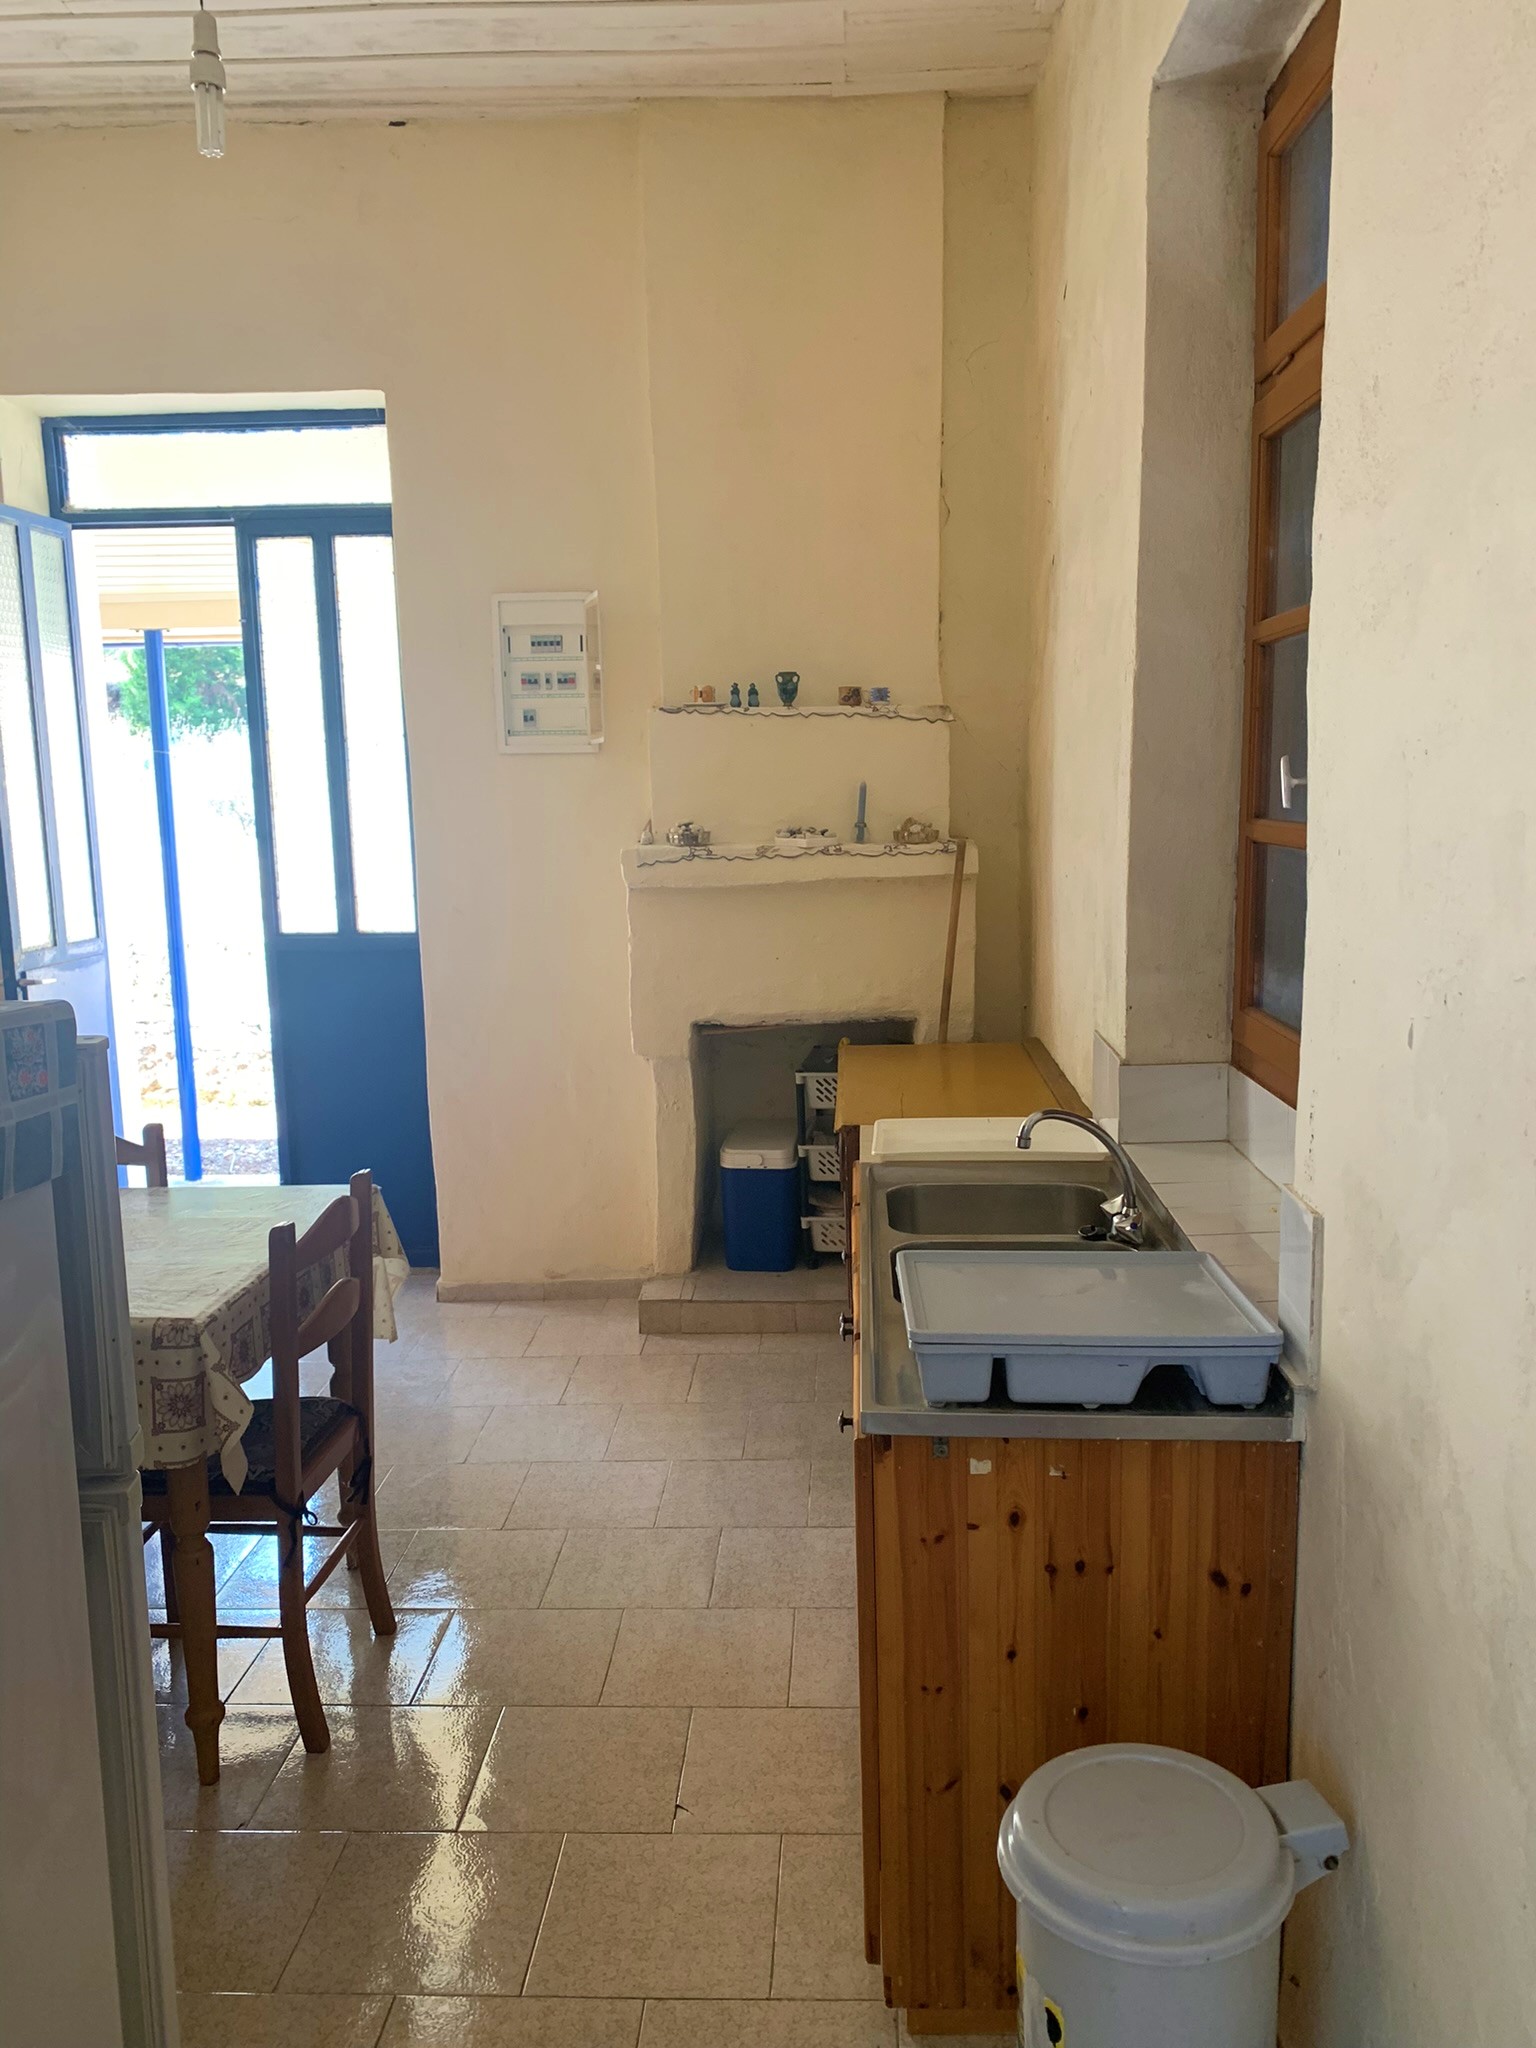 Kitchen of house for sale on Ithaca, Greece, Anoghi